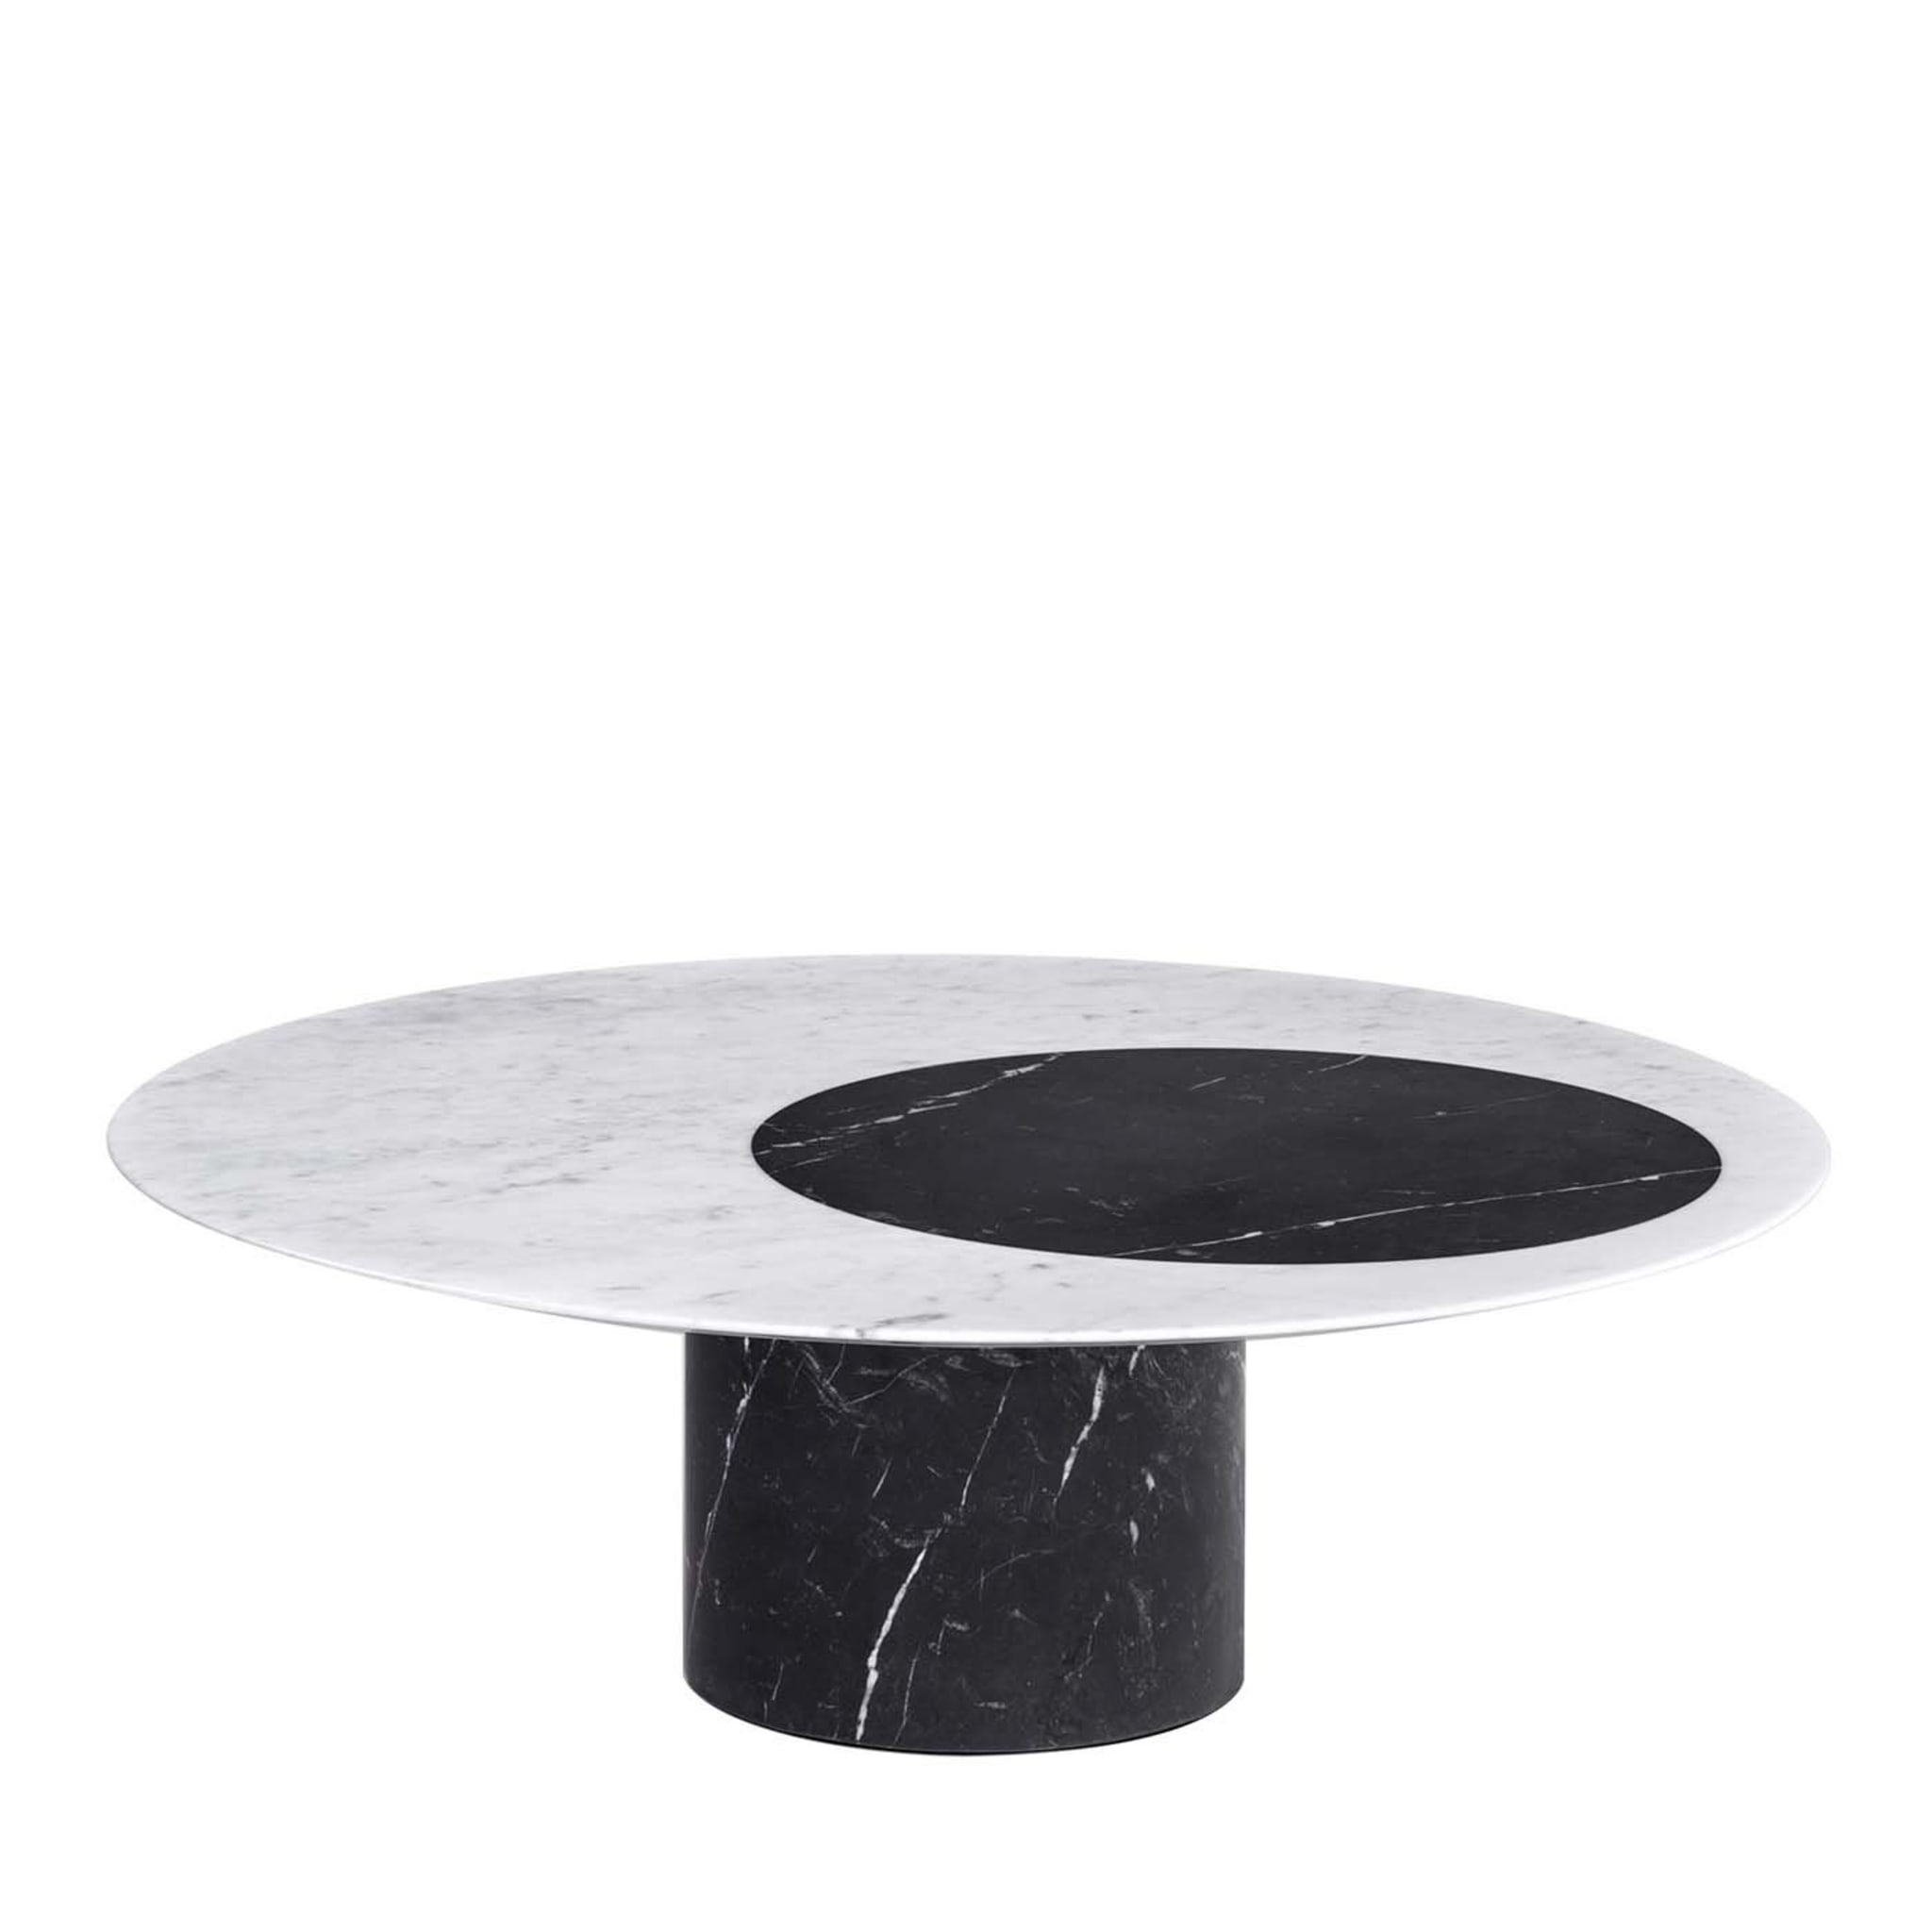 Proiezioni Round Black and White Marble Coffee Table by Elisa Ossino - Main view